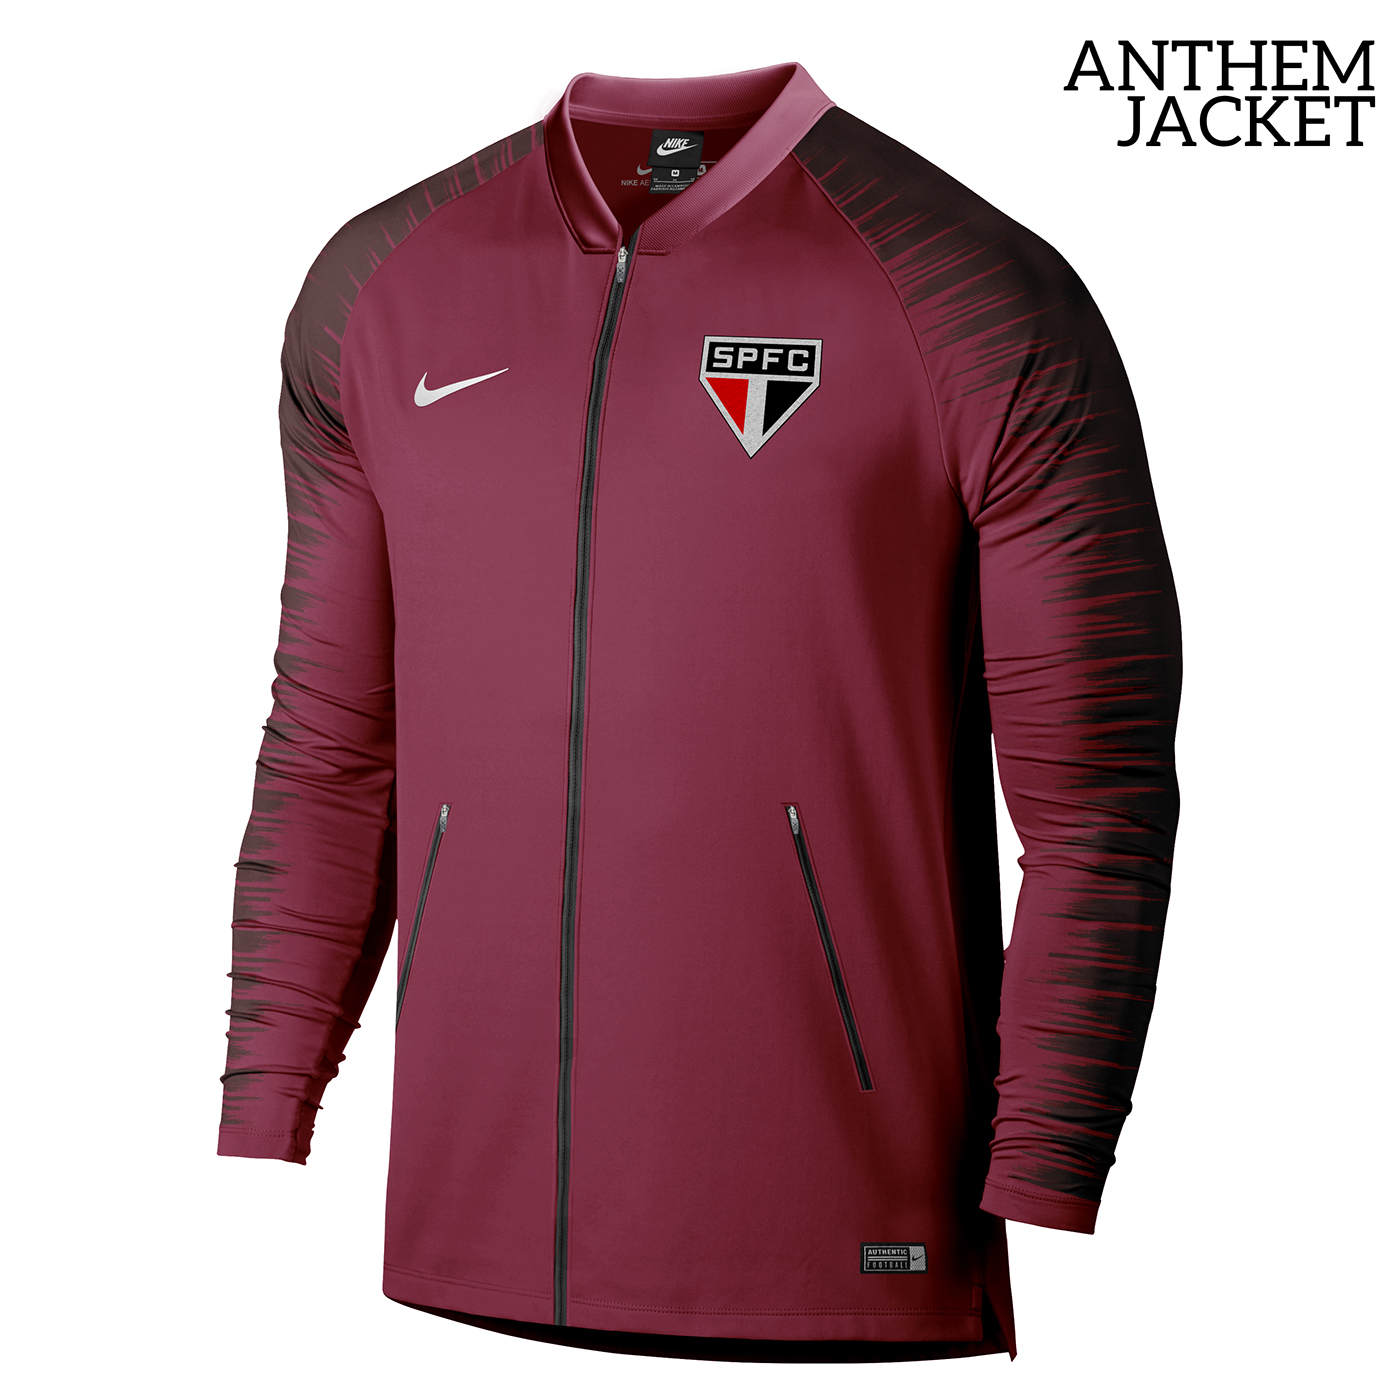 Nike jersey concept SPFC